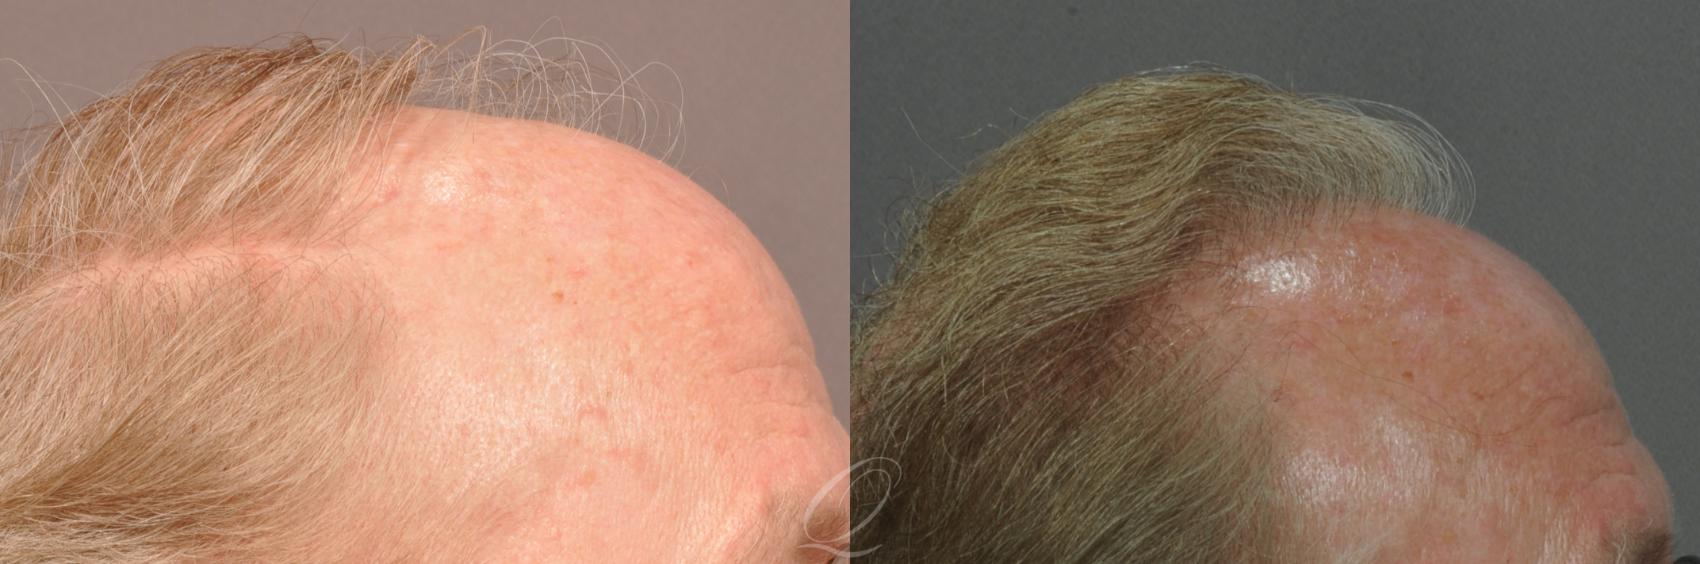 FUT Case 1019 Before & After View #3 | Rochester, Buffalo, & Syracuse, NY | Quatela Center for Hair Restoration